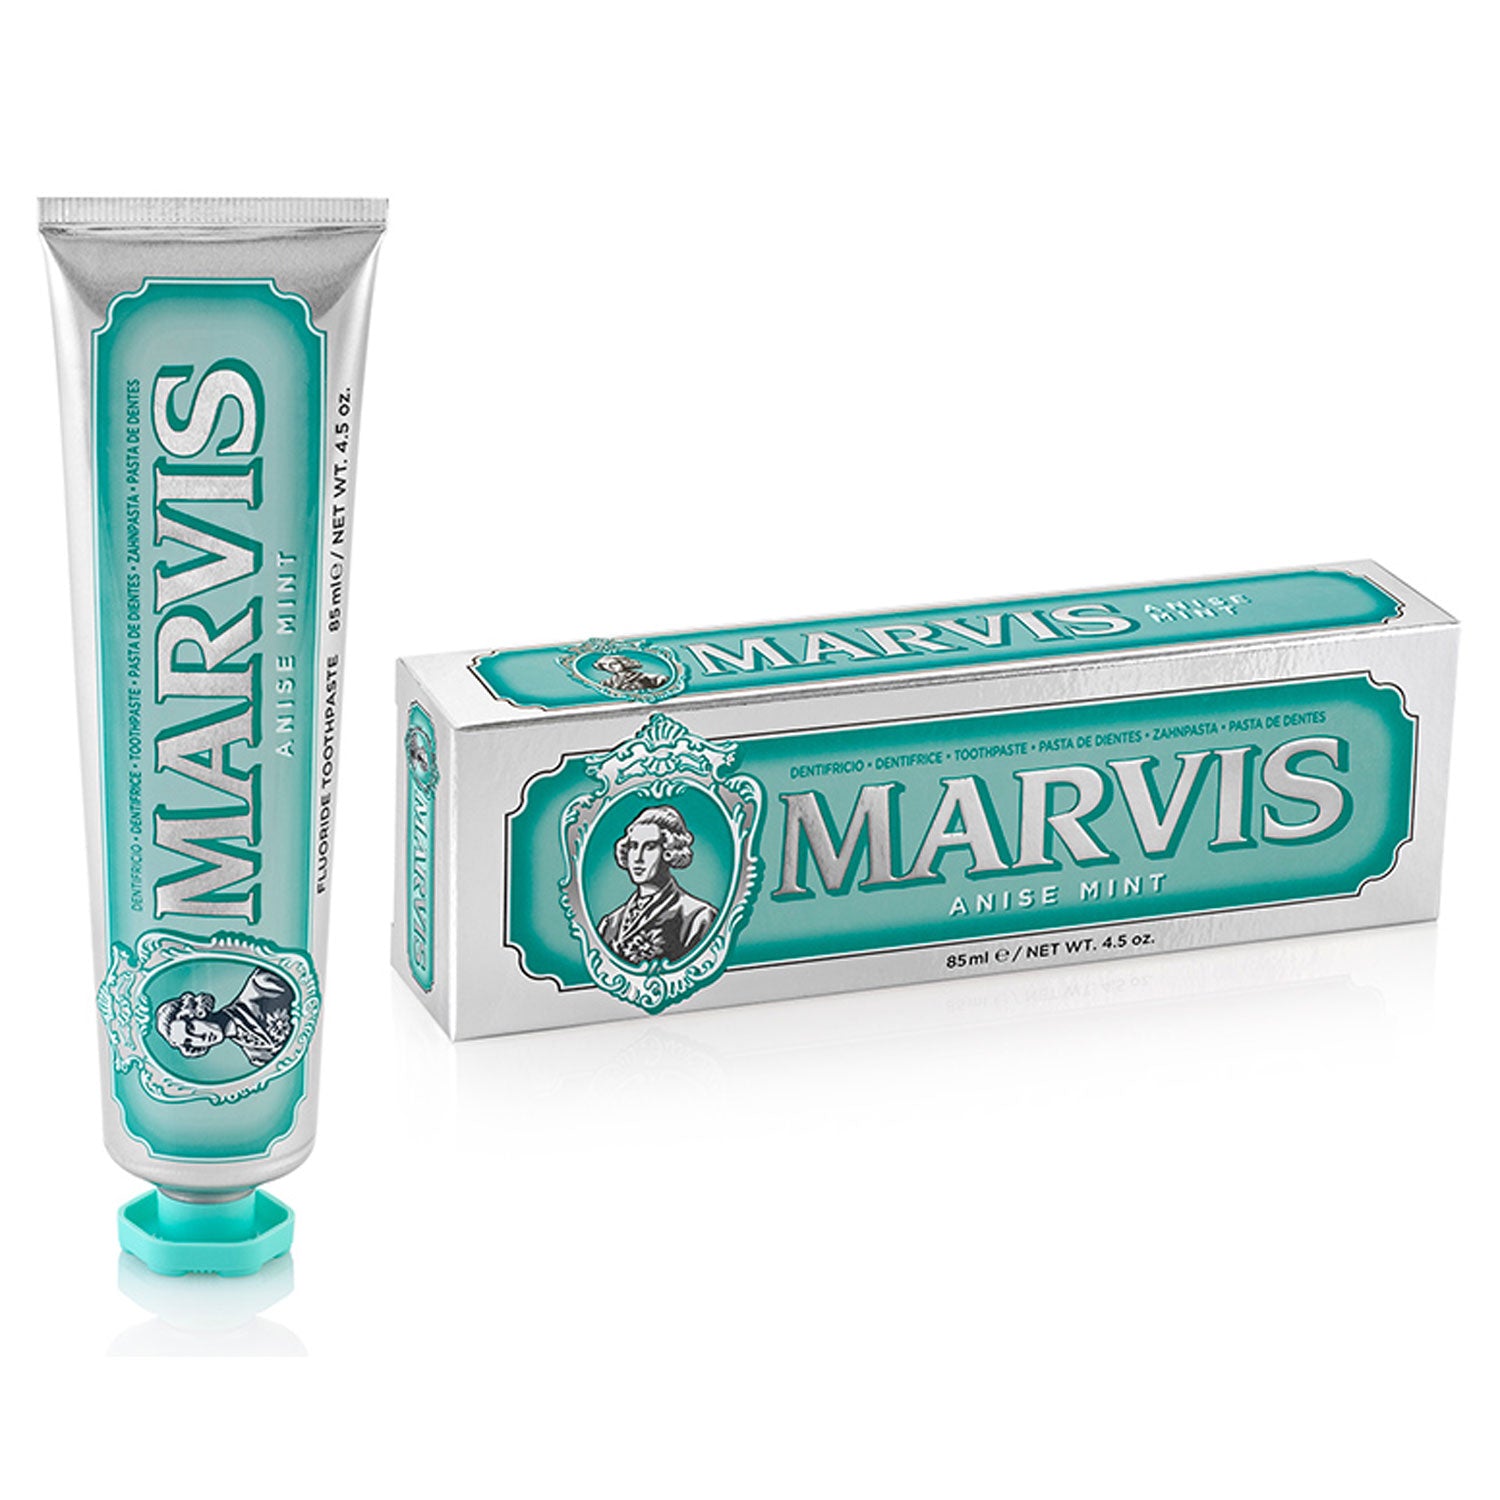 Marvis Anise Toothpaste 85ml - Orcadia